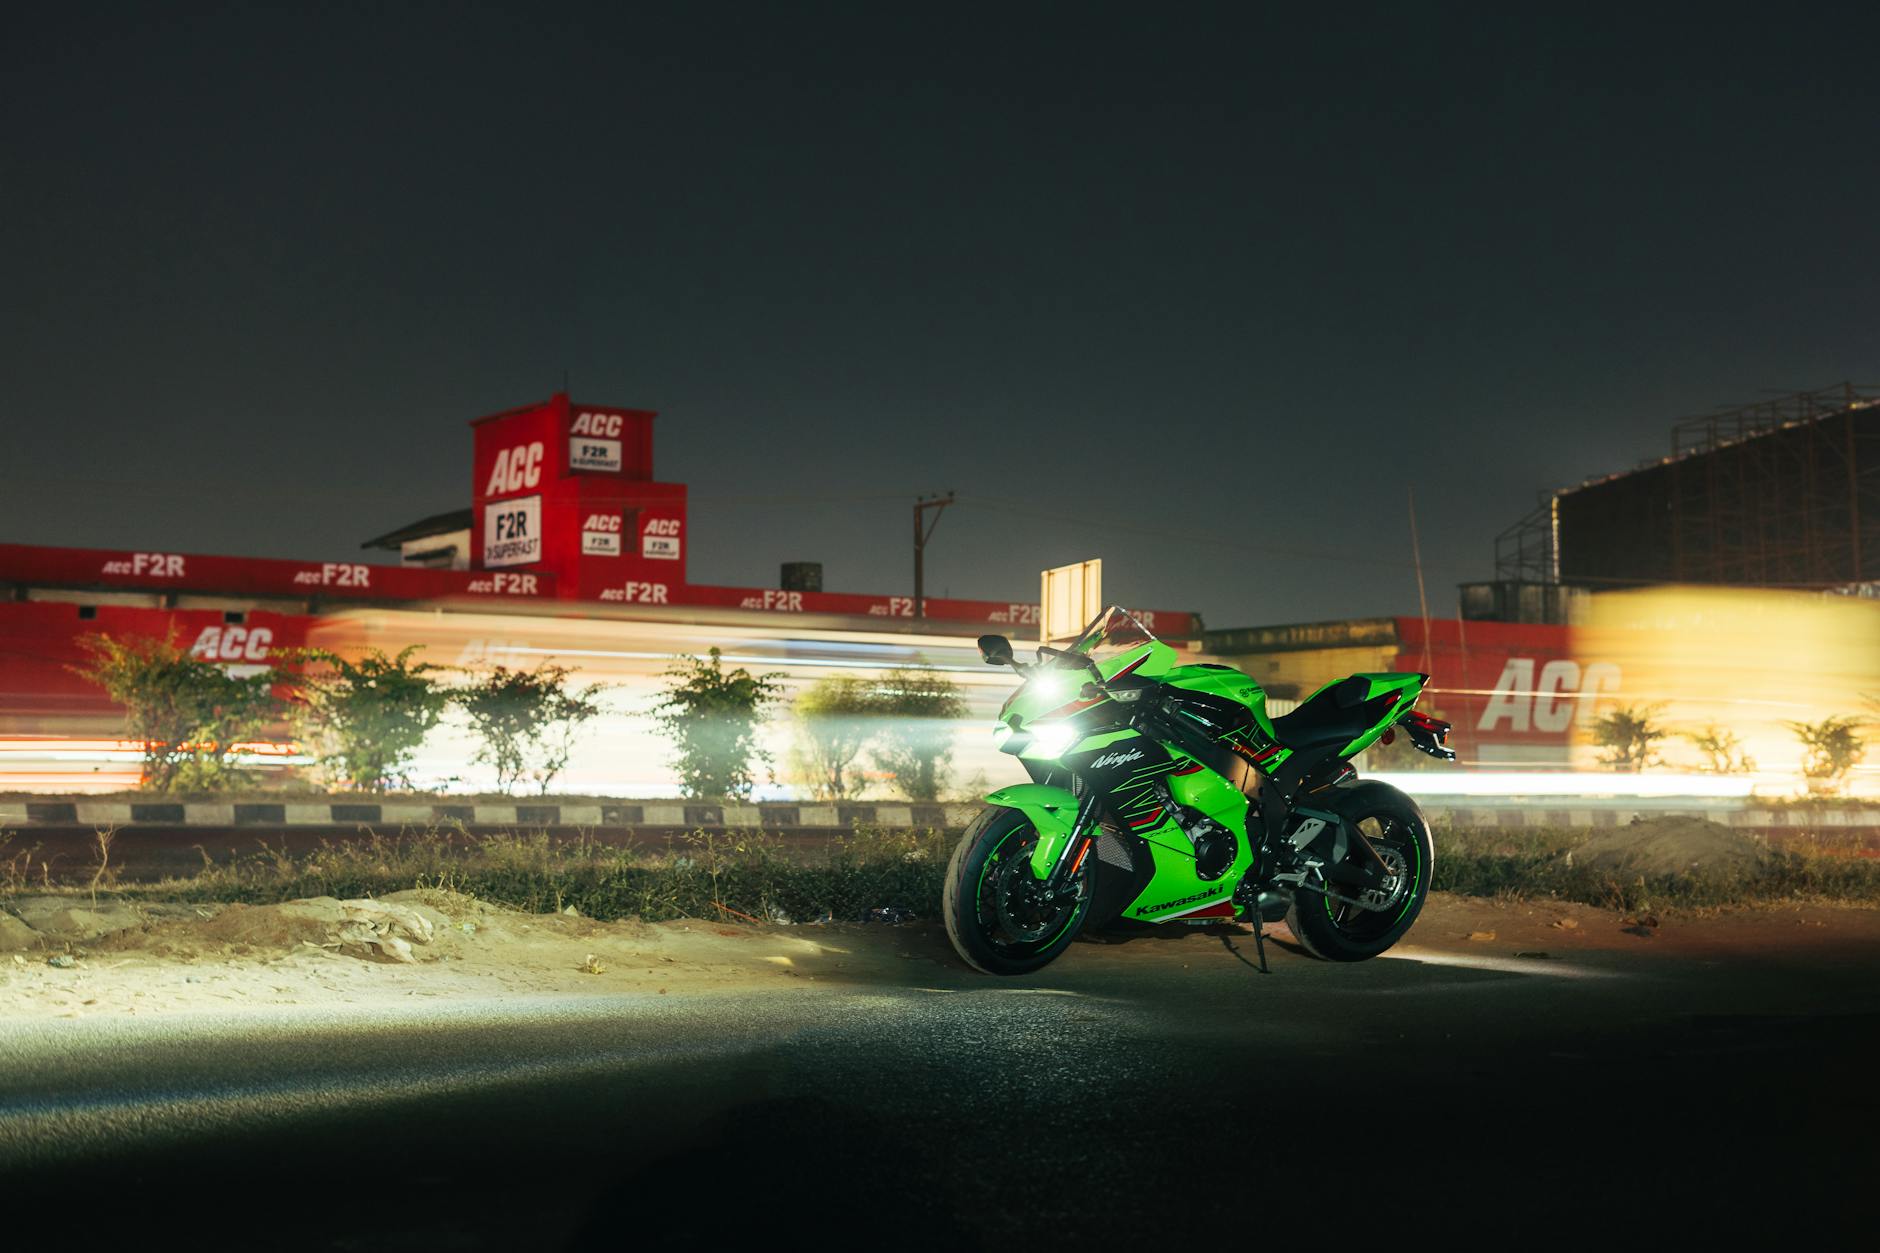 A green motorcycle is driving down a road at night